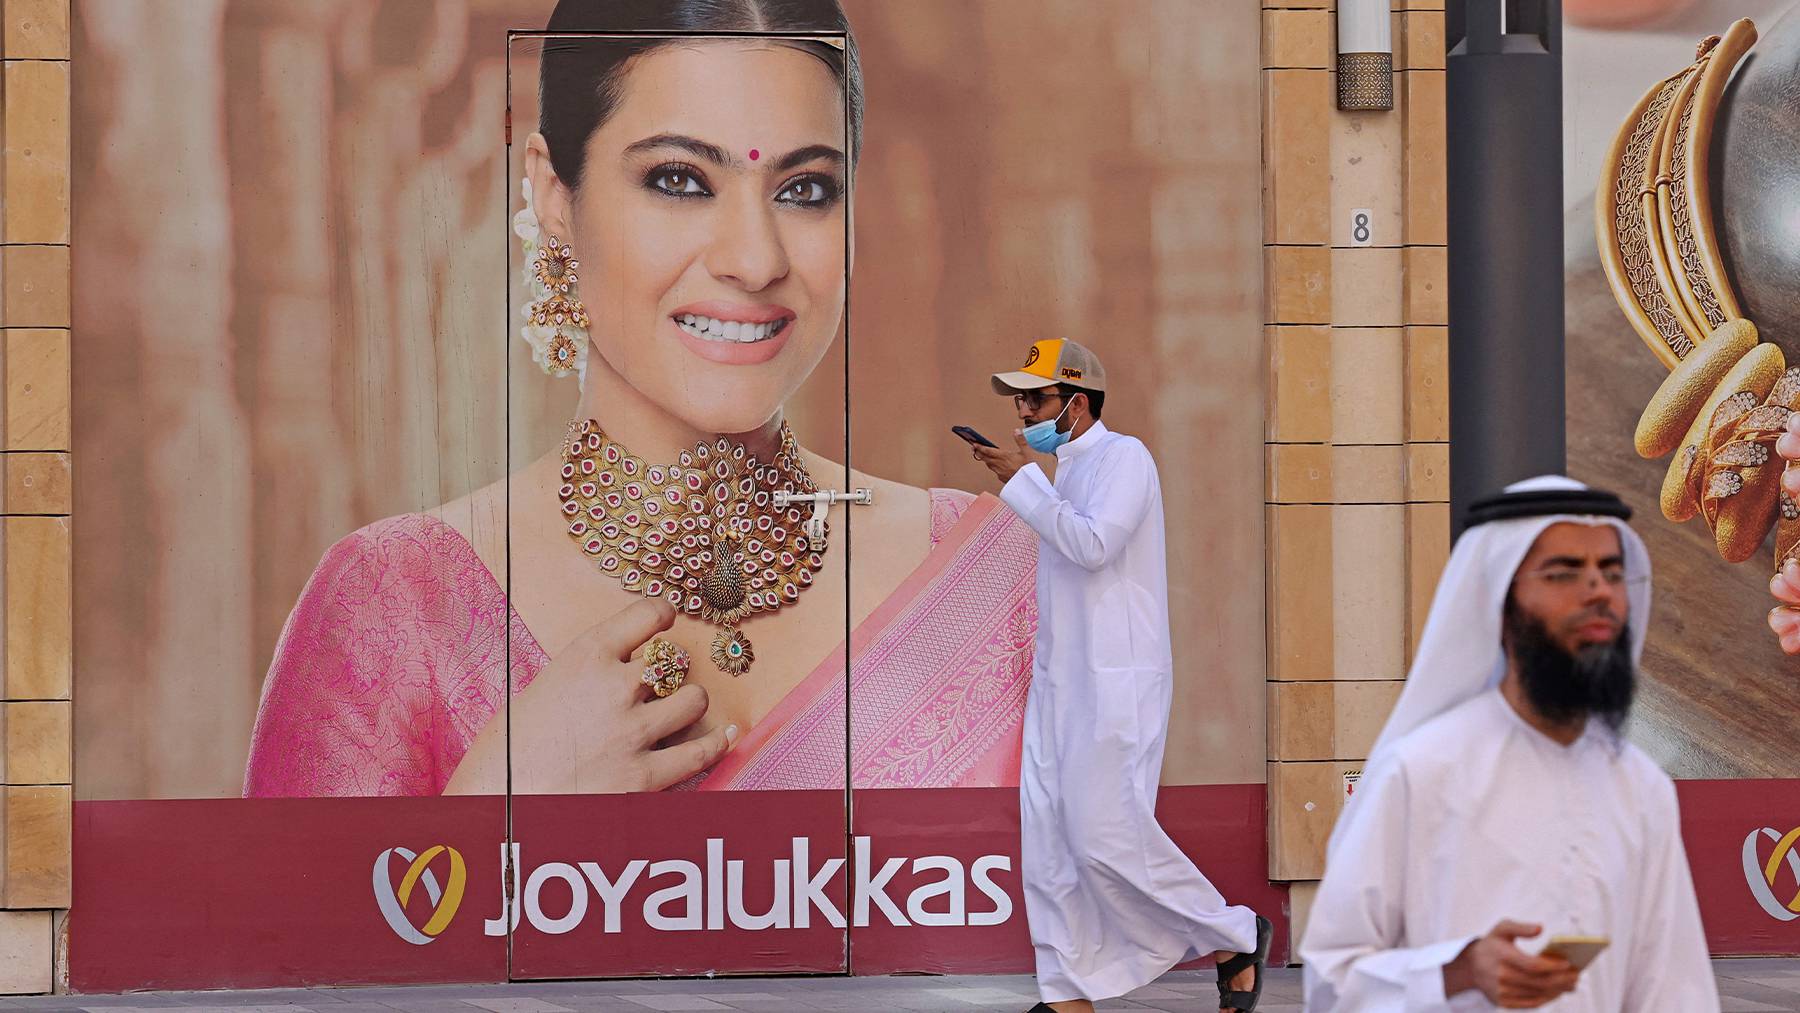 Whether building billion-dollar retail empires or stitching humble cloth, people from the Indian subcontinent are an integral part of the fashion industry in the United Arab Emirates.